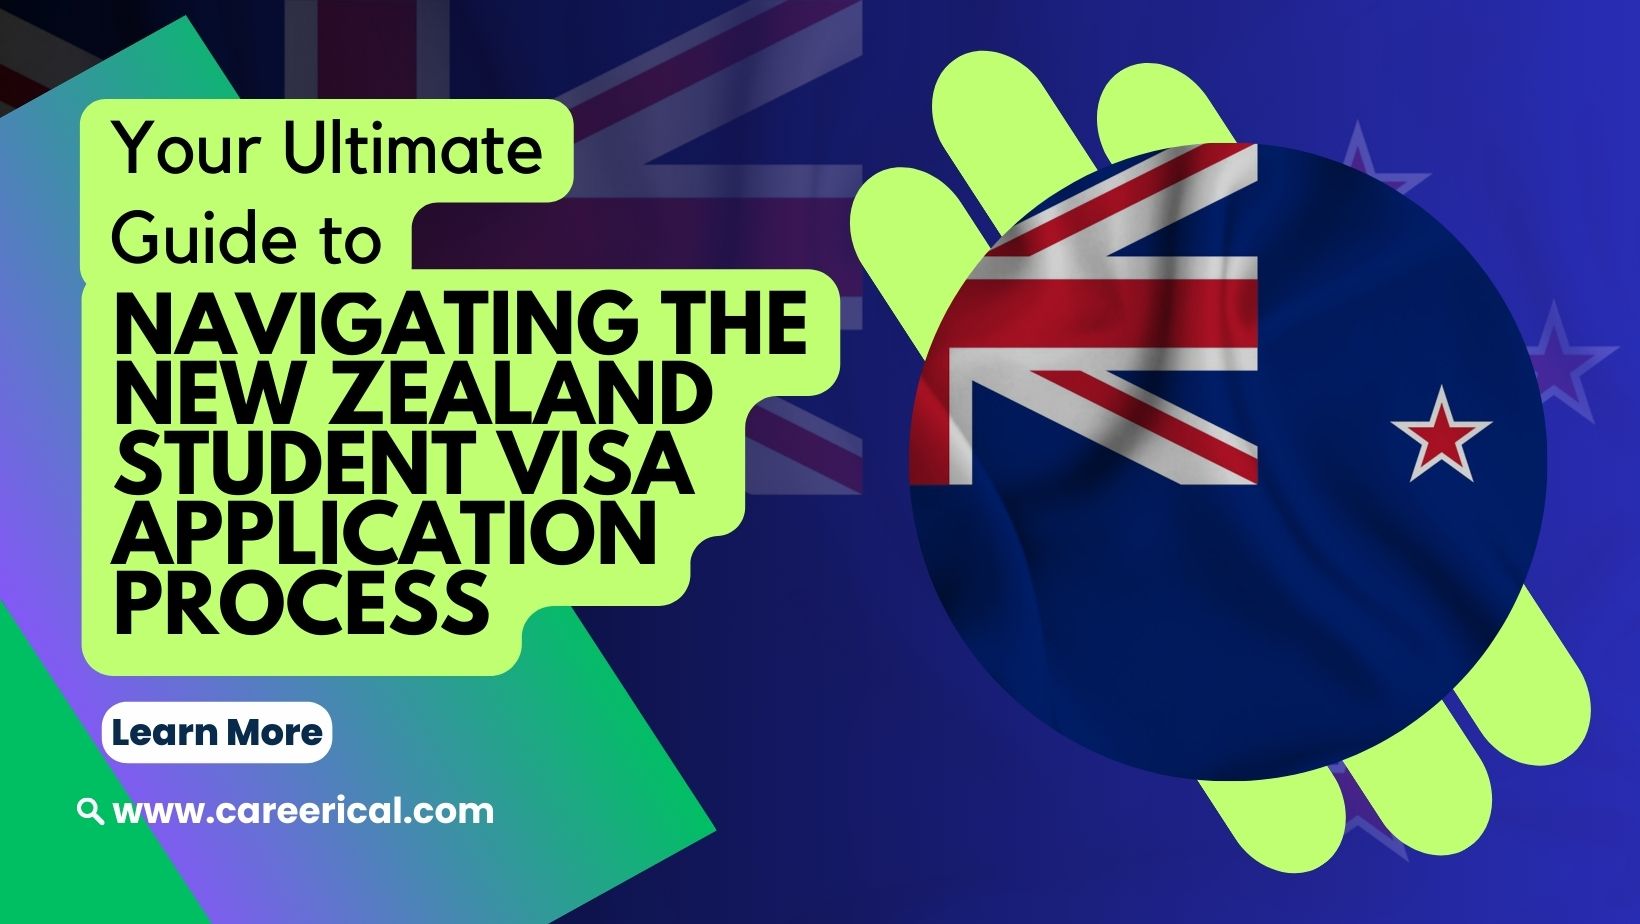 Navigating the New Zealand Visa Process: A Guide for Greek and Hungarian Citizens